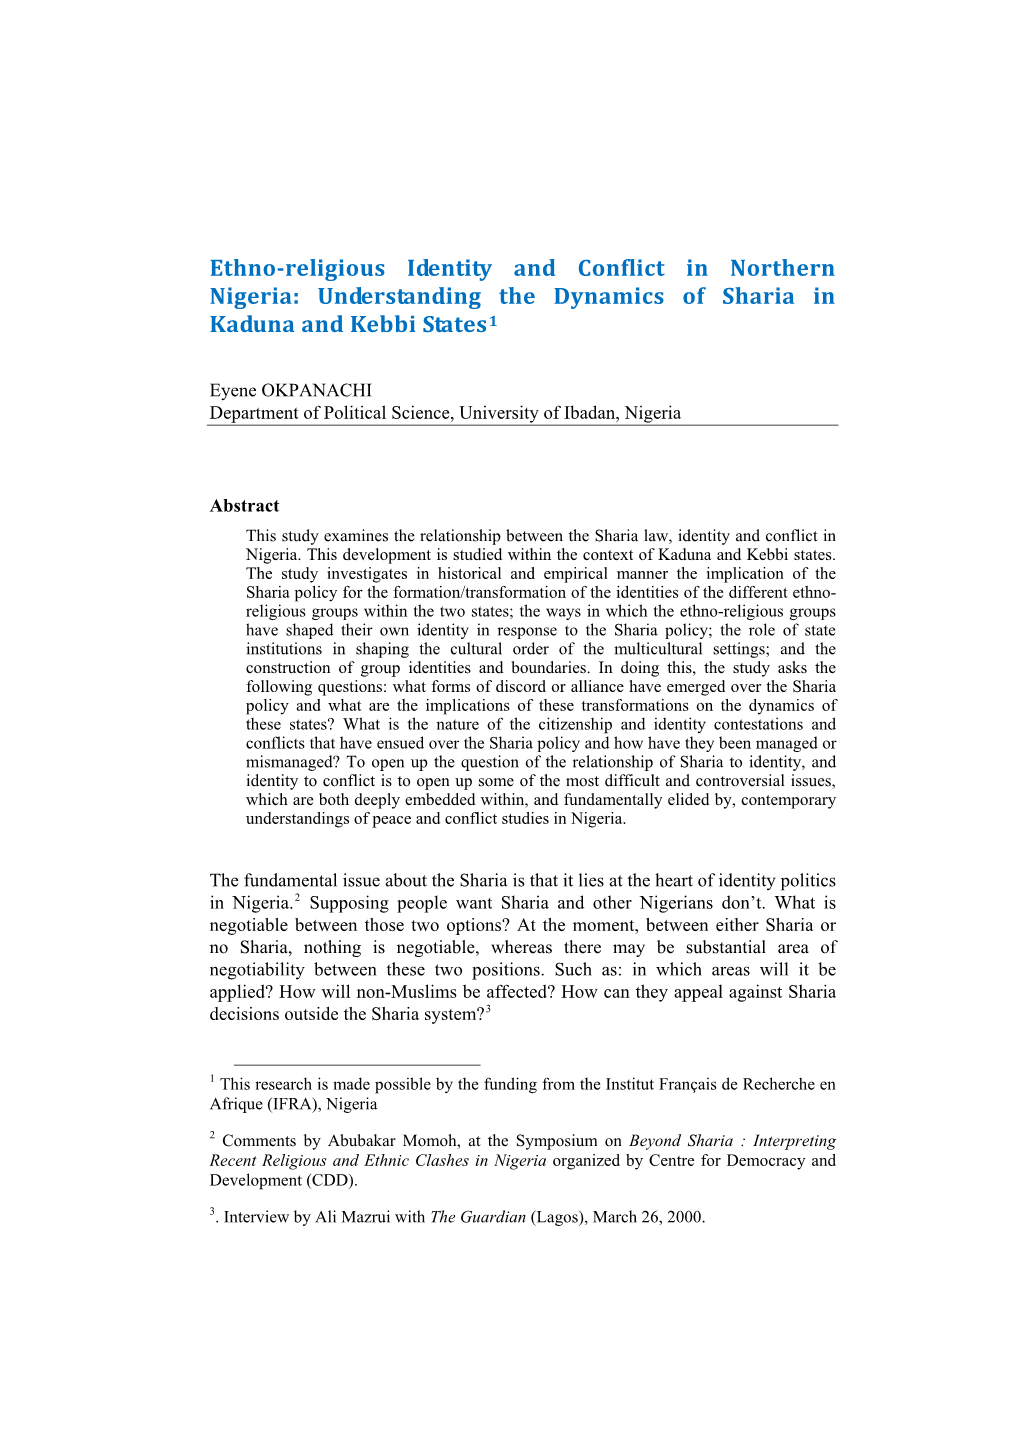 Ethno-Religious Identity and Conflict in Northern Nigeria